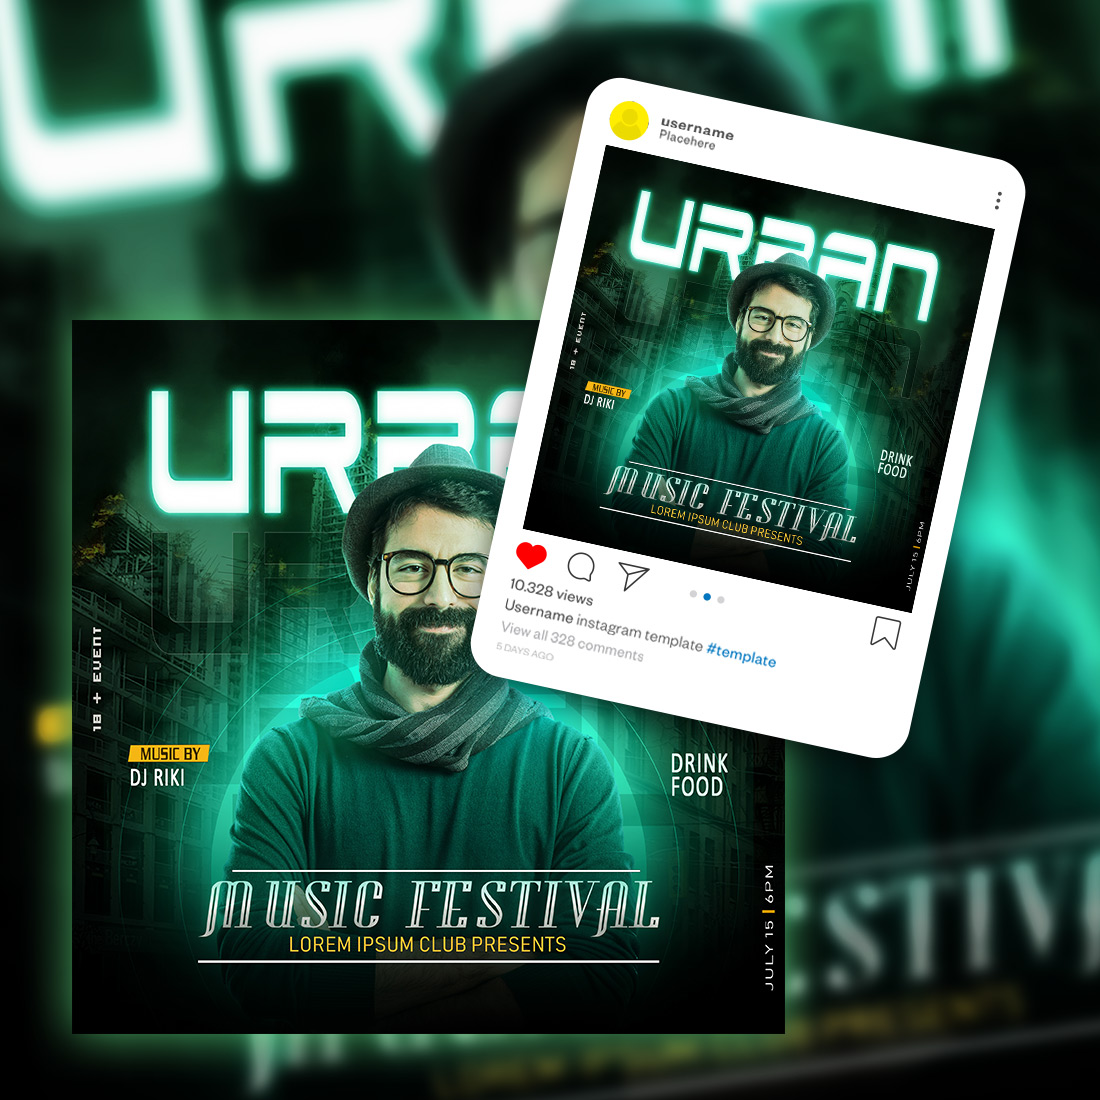 DJ, URBAN Music Party Flyer Design, social media post Photoshop Template Psd preview image.